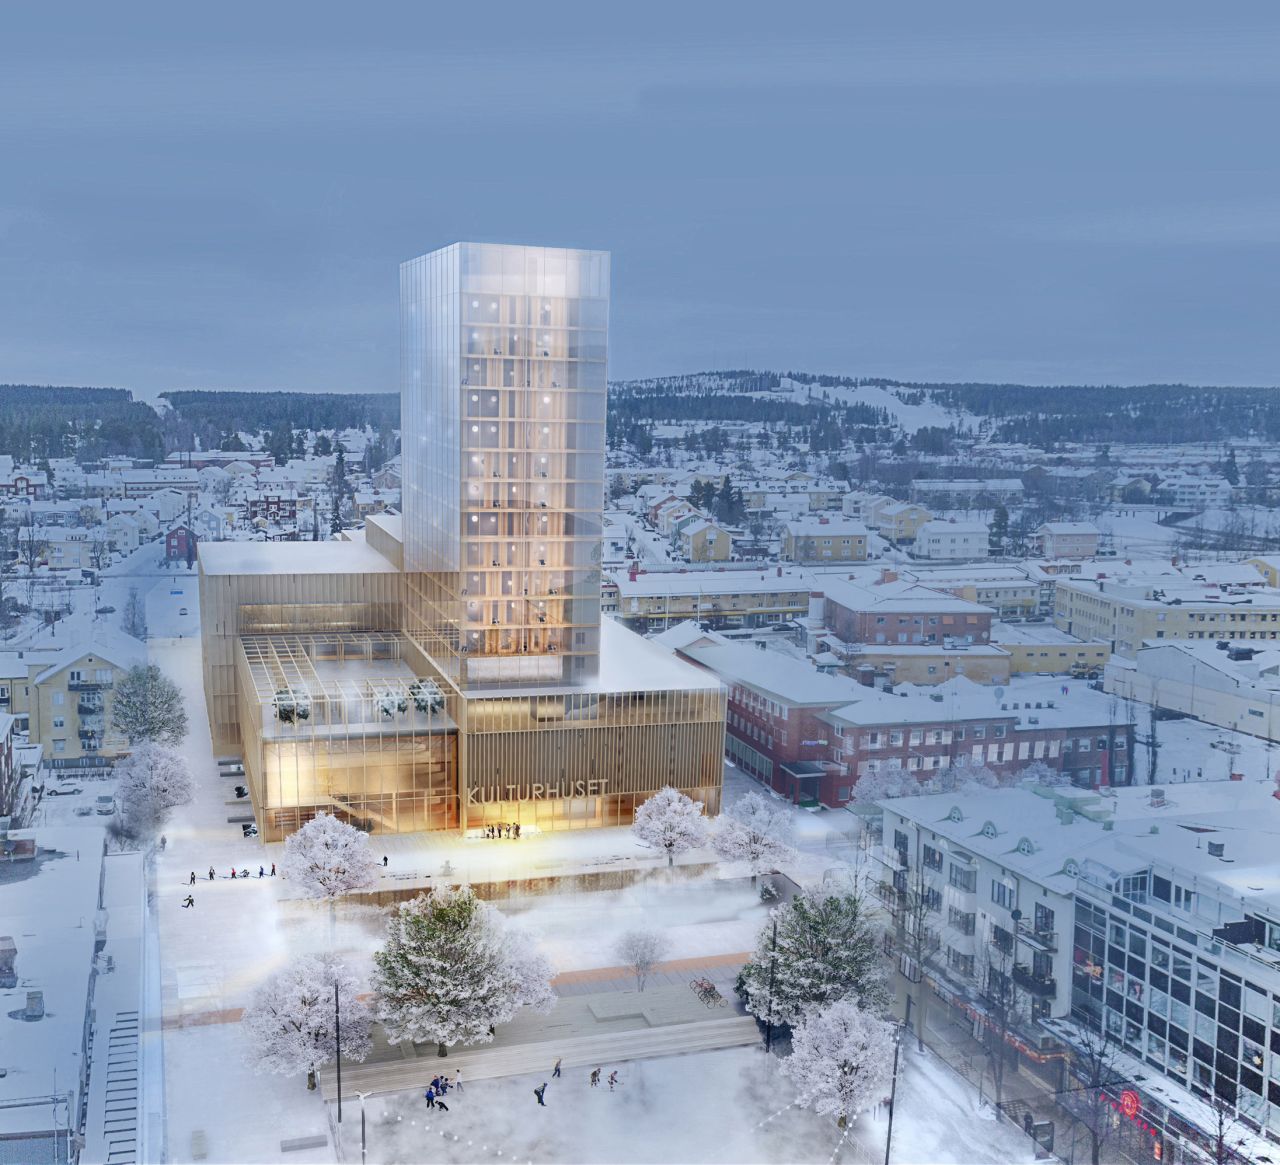 The "Sida Vid Sida" ("side by side") wooden building is a proposed project by Swedish architects White Arkitekter.